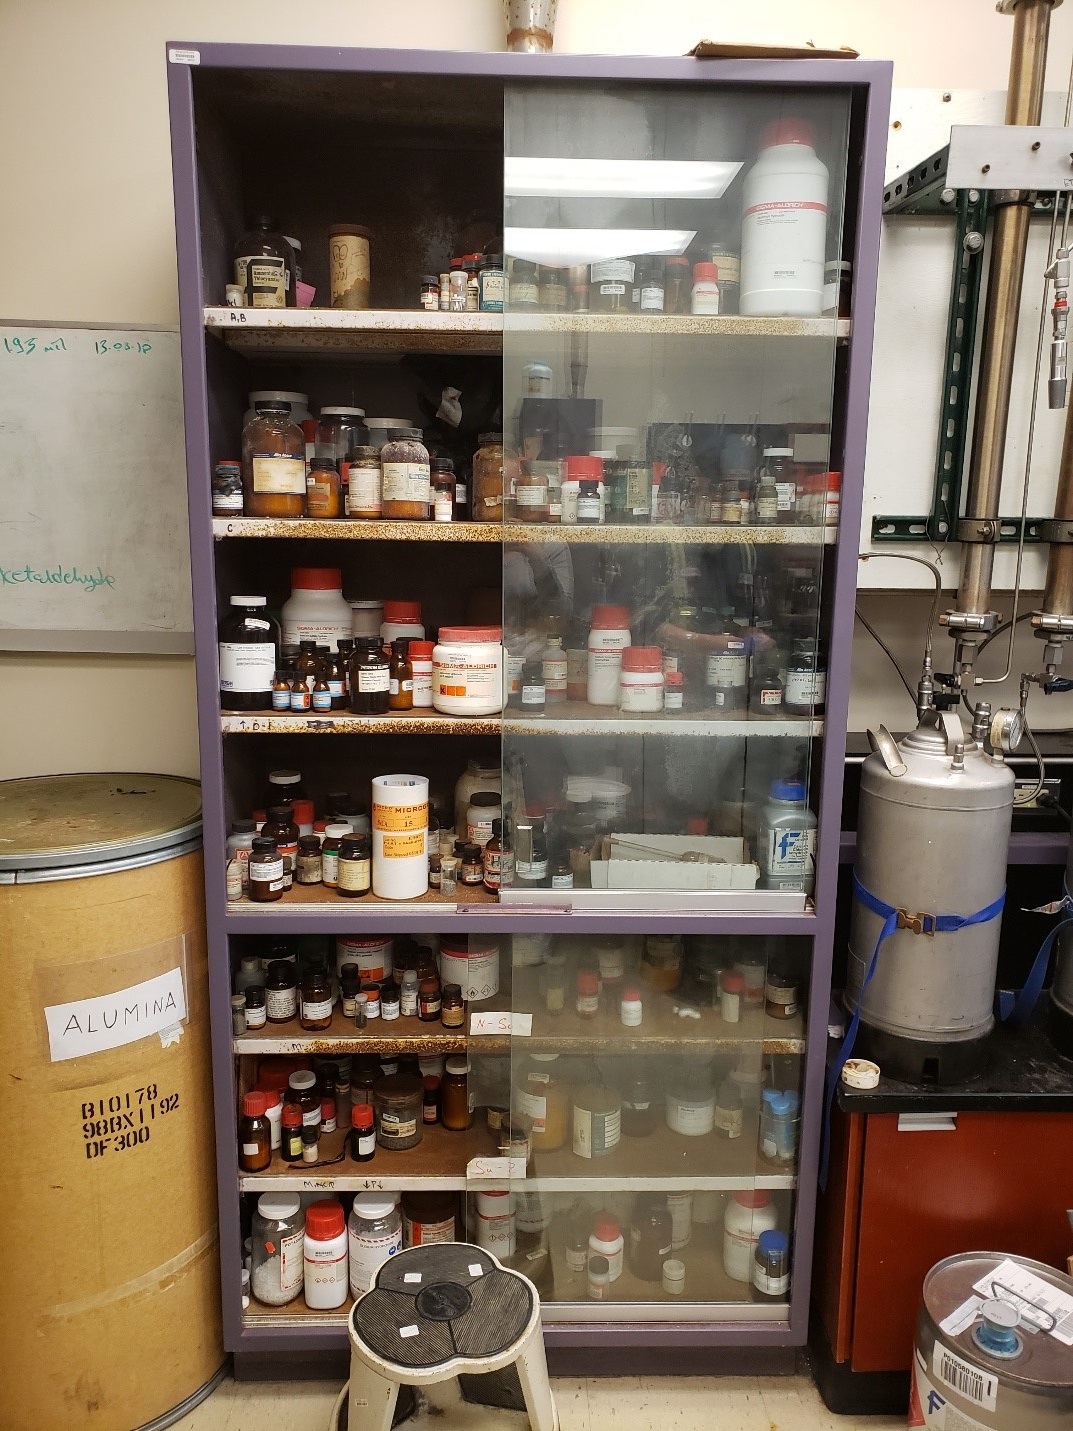 Laboratory cabinet with hundreds of chemical bottles for disposal